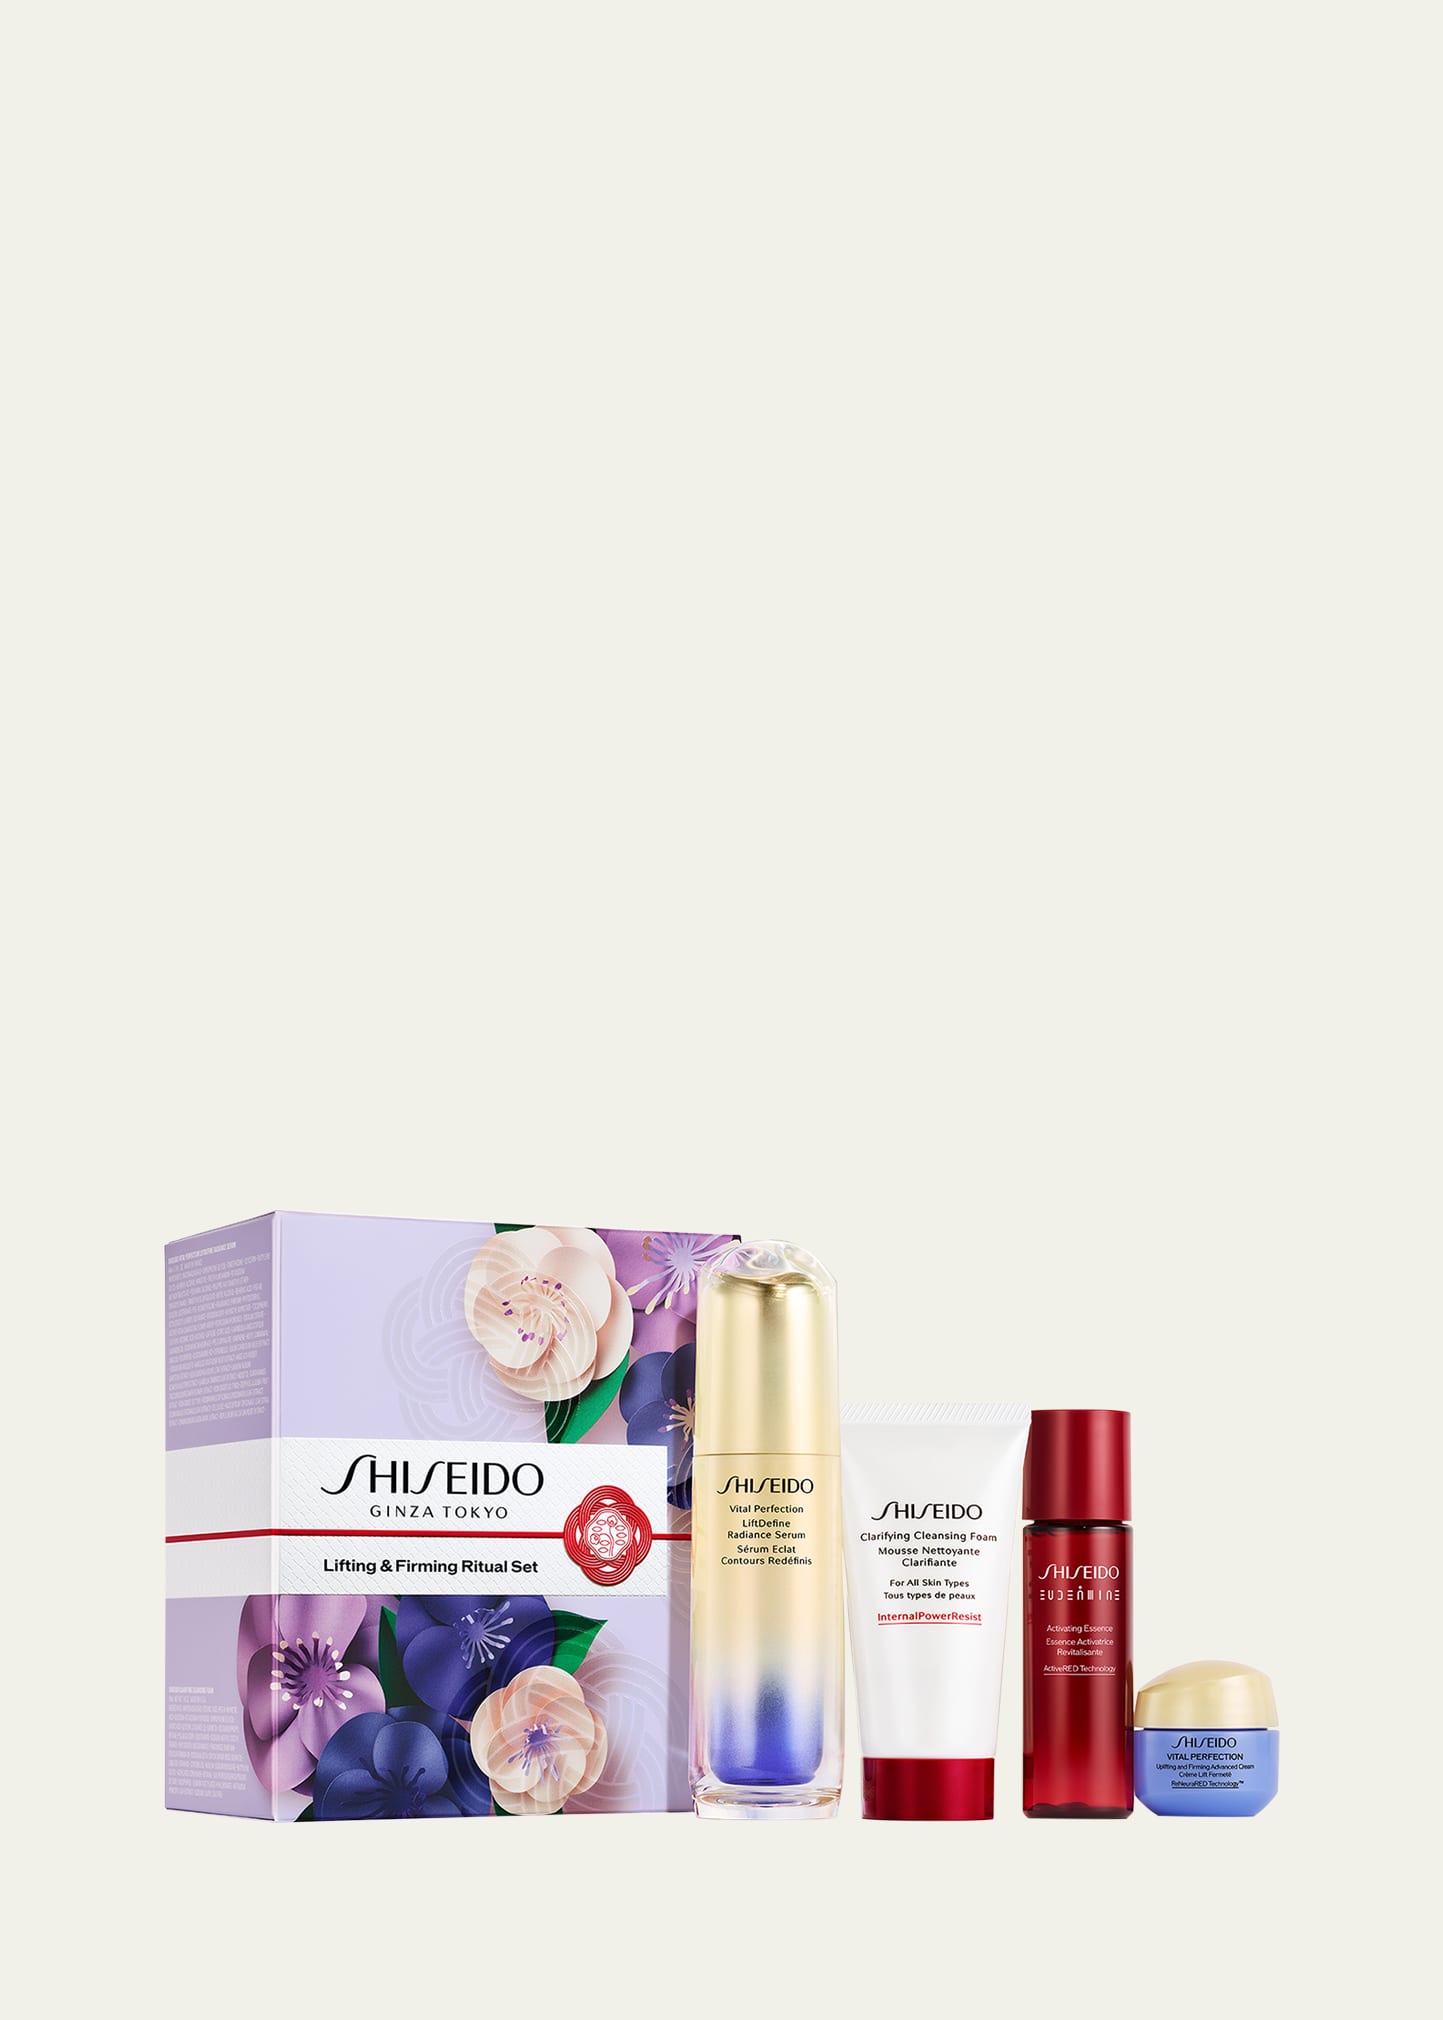 Limited Edition Lifting & Firming Ritual Set ($215 Value)